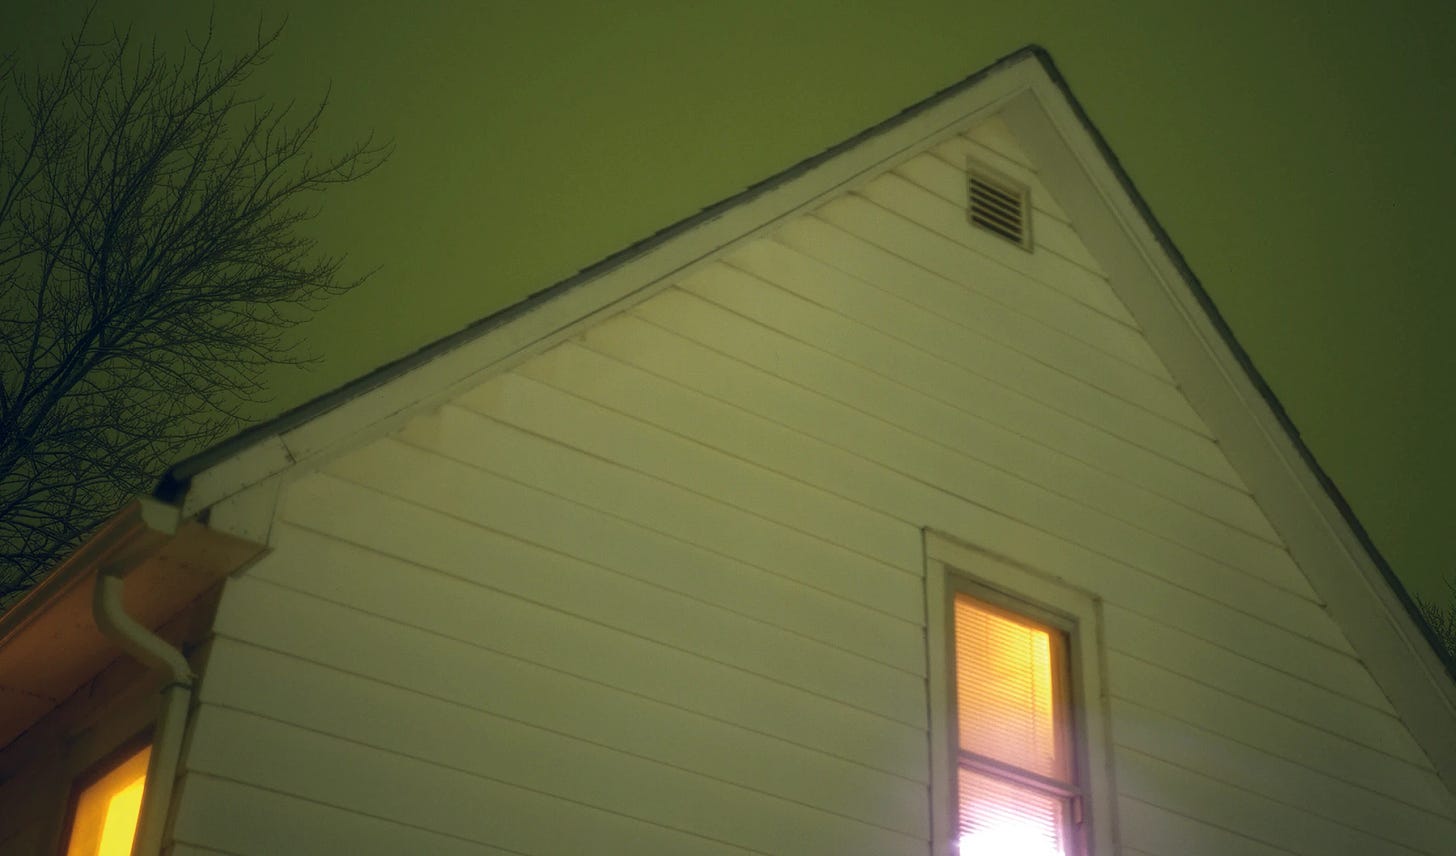 Album cover to the band American Football's album "LP1," which features a standard white Midwestern house